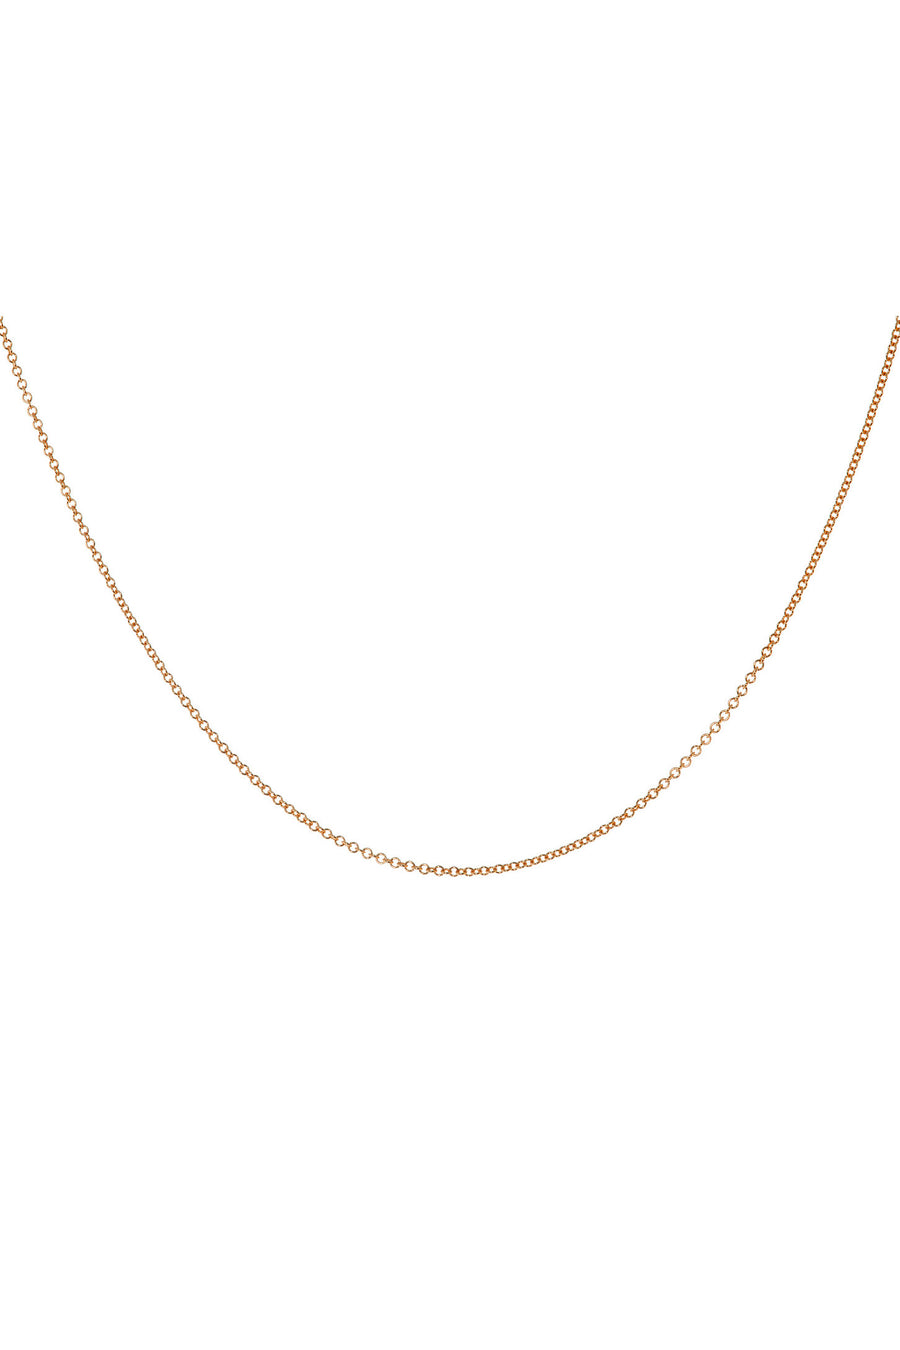 1.3mm Cable Chain in 14k gold | 20"